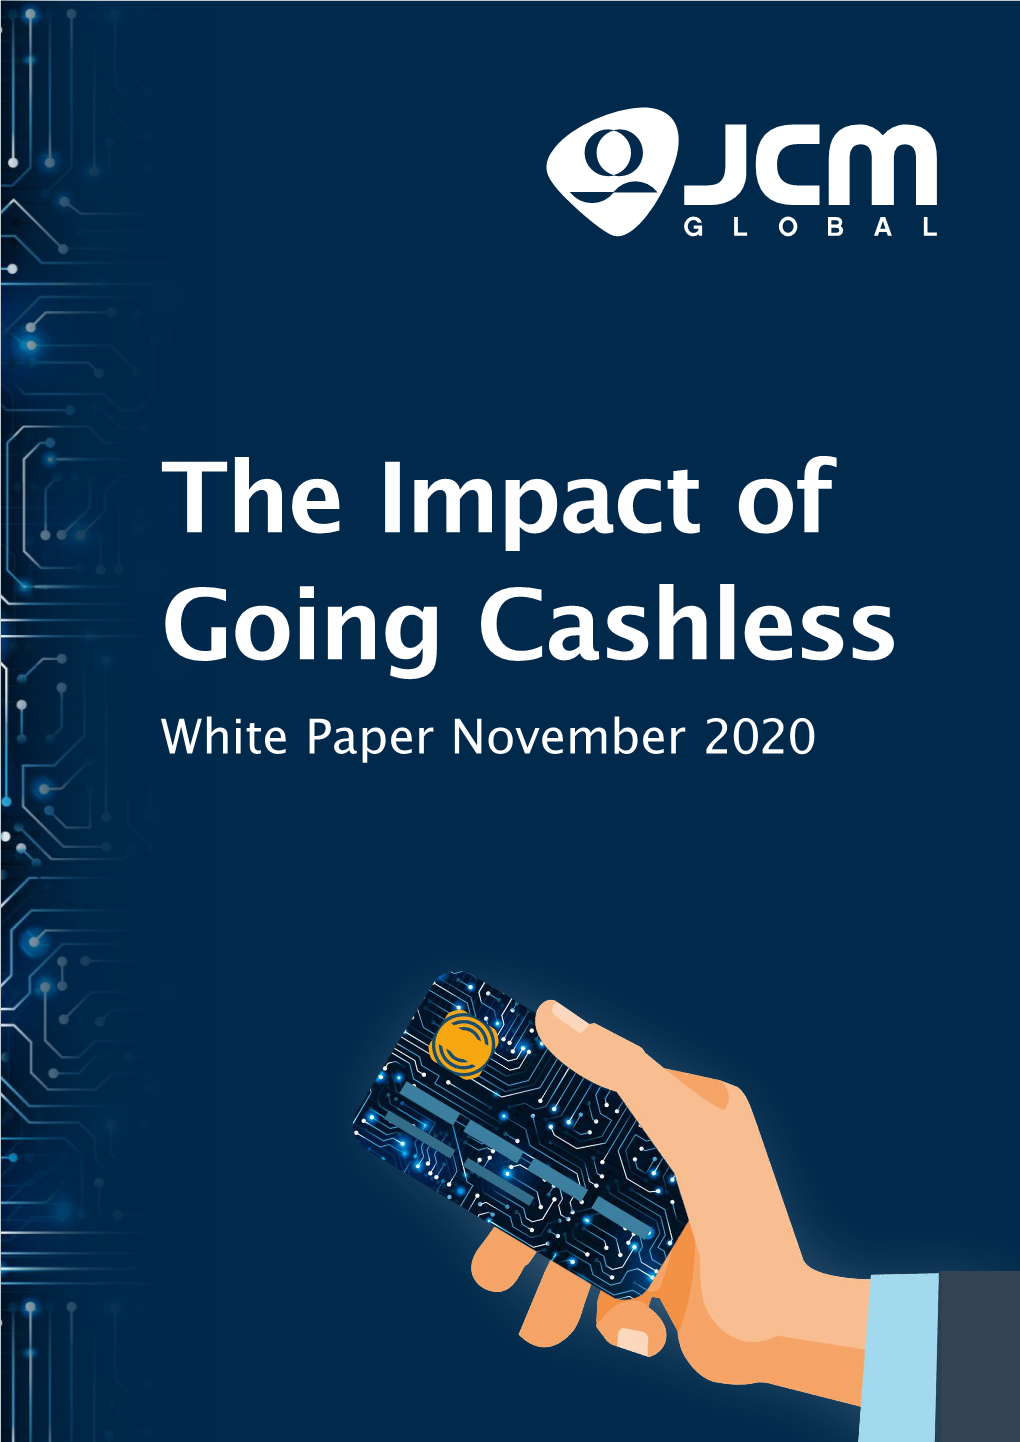 The Impact of Going Cashless